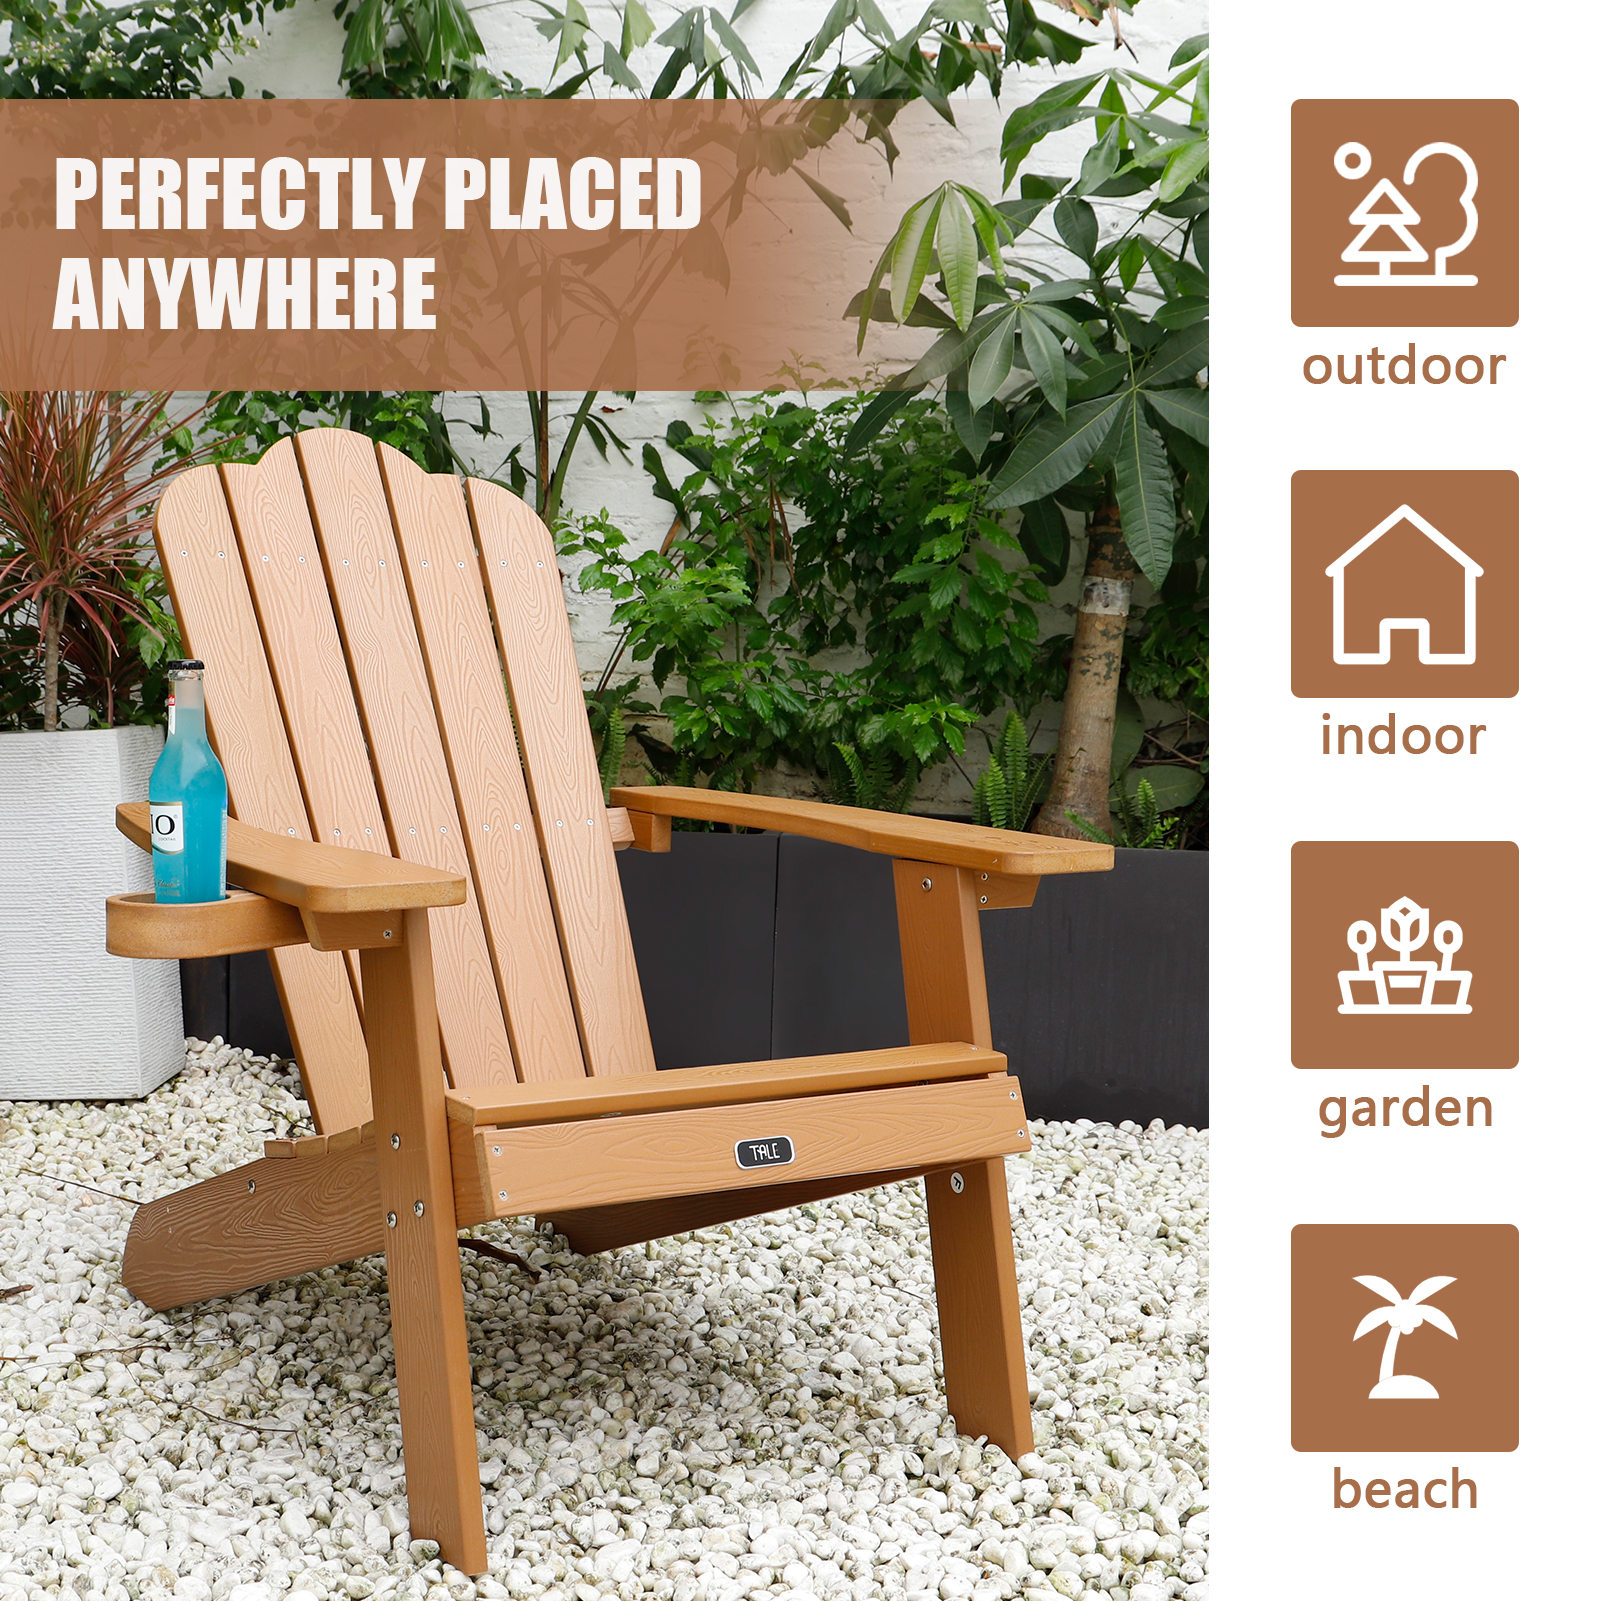 KOFUN Adirondack Chair with Cup Holder, Patio Outdoor Chairs, Weather Resistant Lounge Chair, Fade-Resistant, Backyard Furniture Painted Chair, for Lawn Outdoor Patio Deck Garden Porch Lawn - image 3 of 7